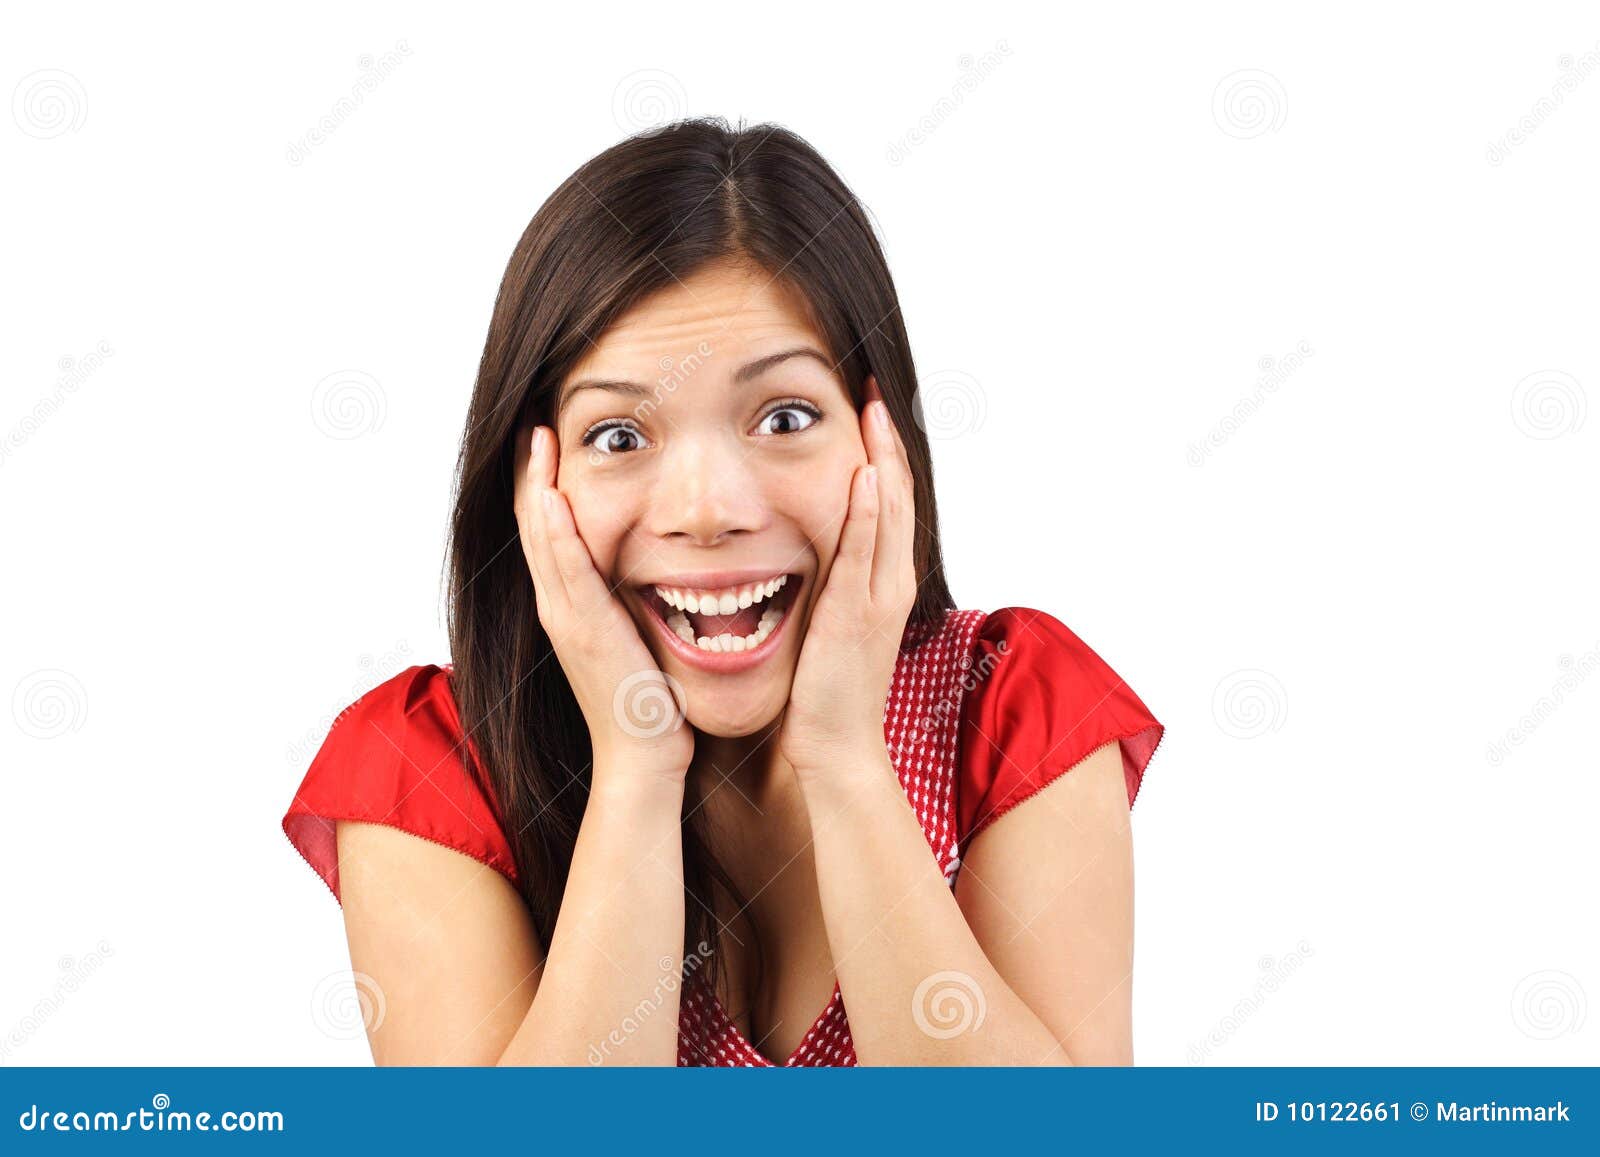 Surprise stock image. Image of screaming, expression - 10122661